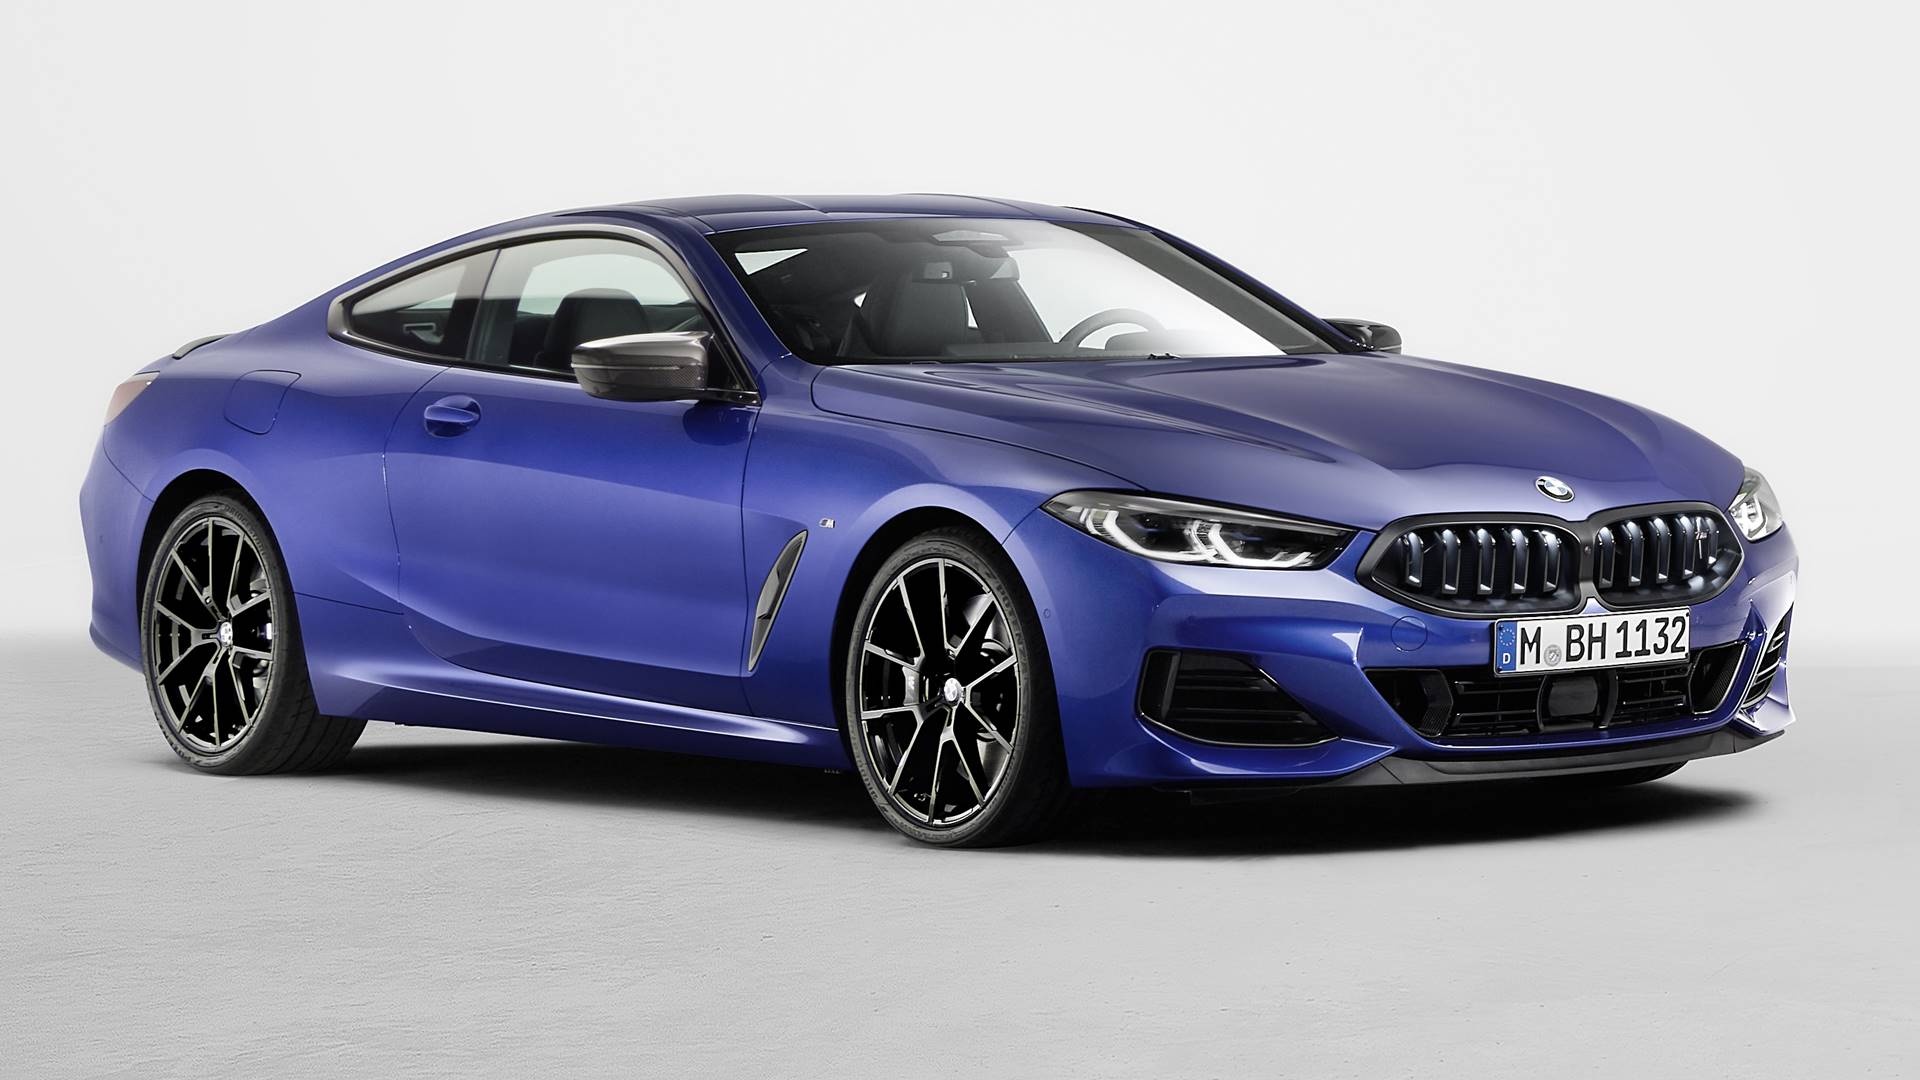 BMW 8 Series, 2022 facelift, Convertible and coup variants, Latest news, 1920x1080 Full HD Desktop